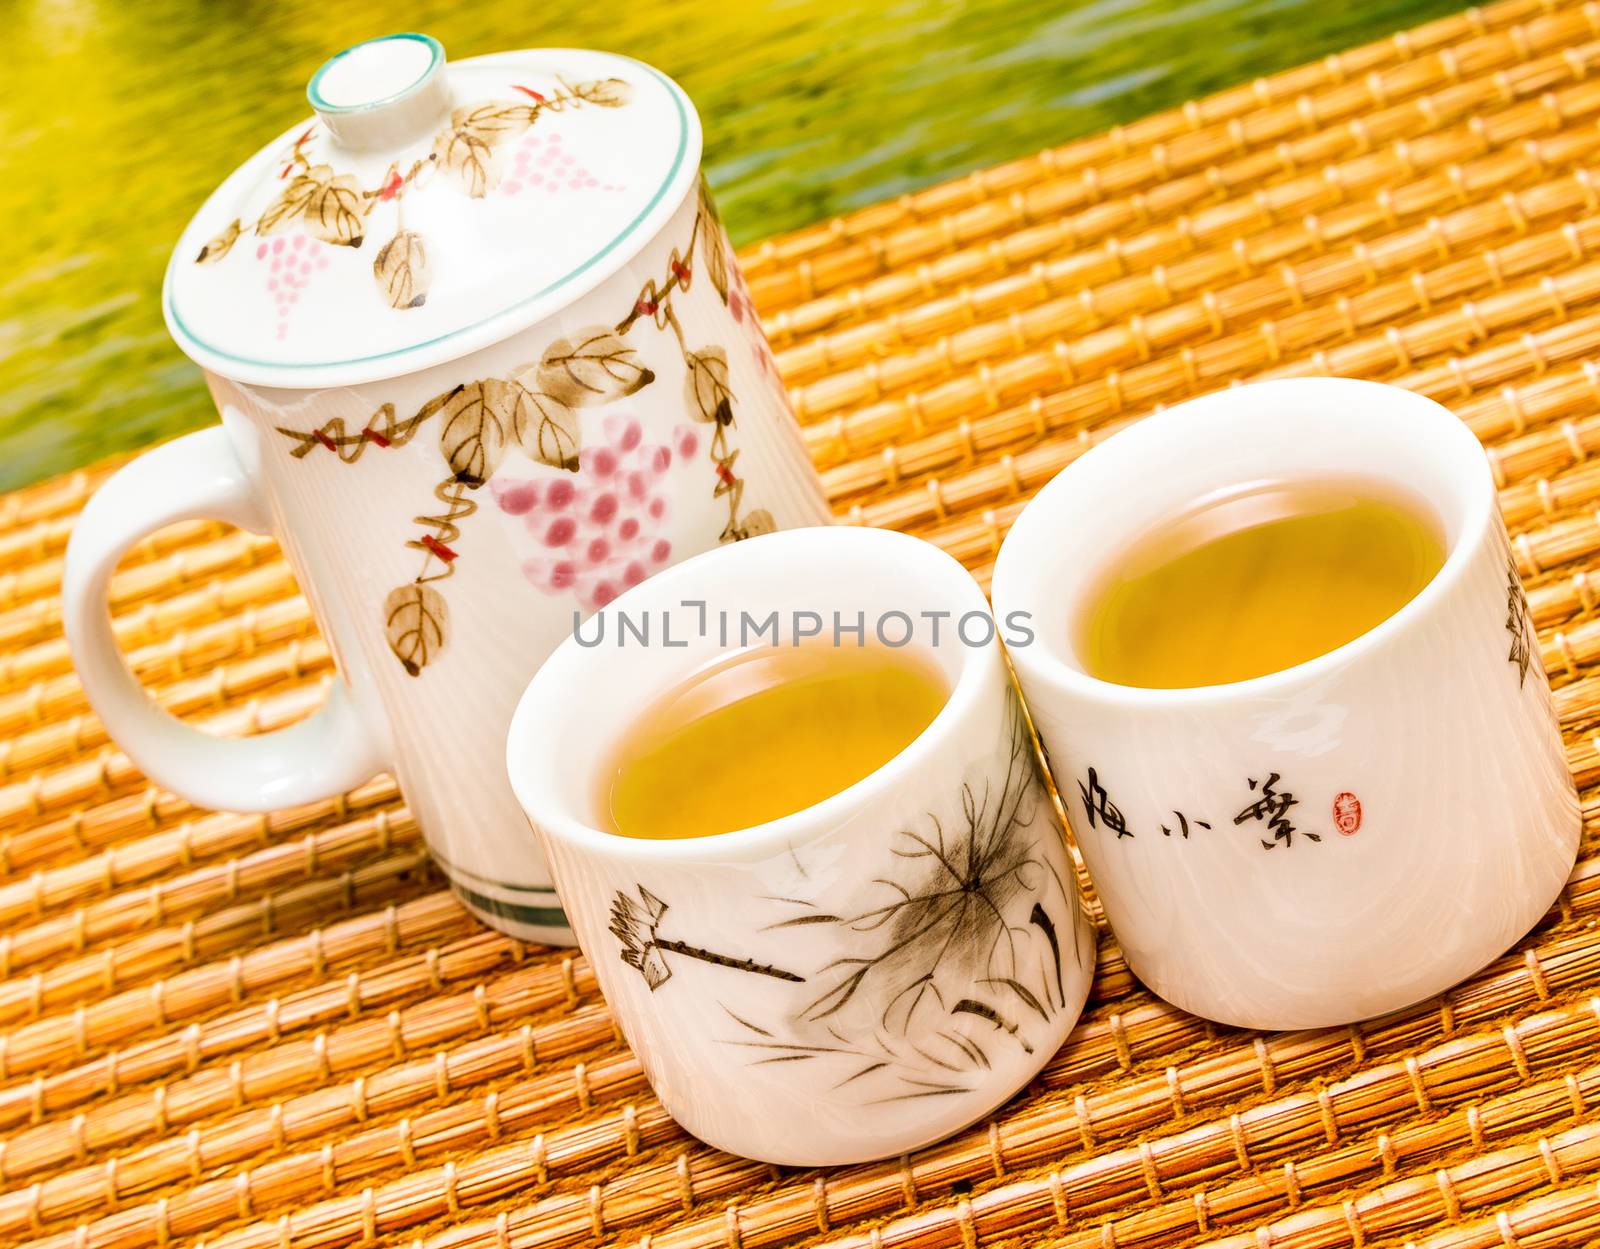 Refreshing Green Tea Meaning Break Refreshment And Beverage